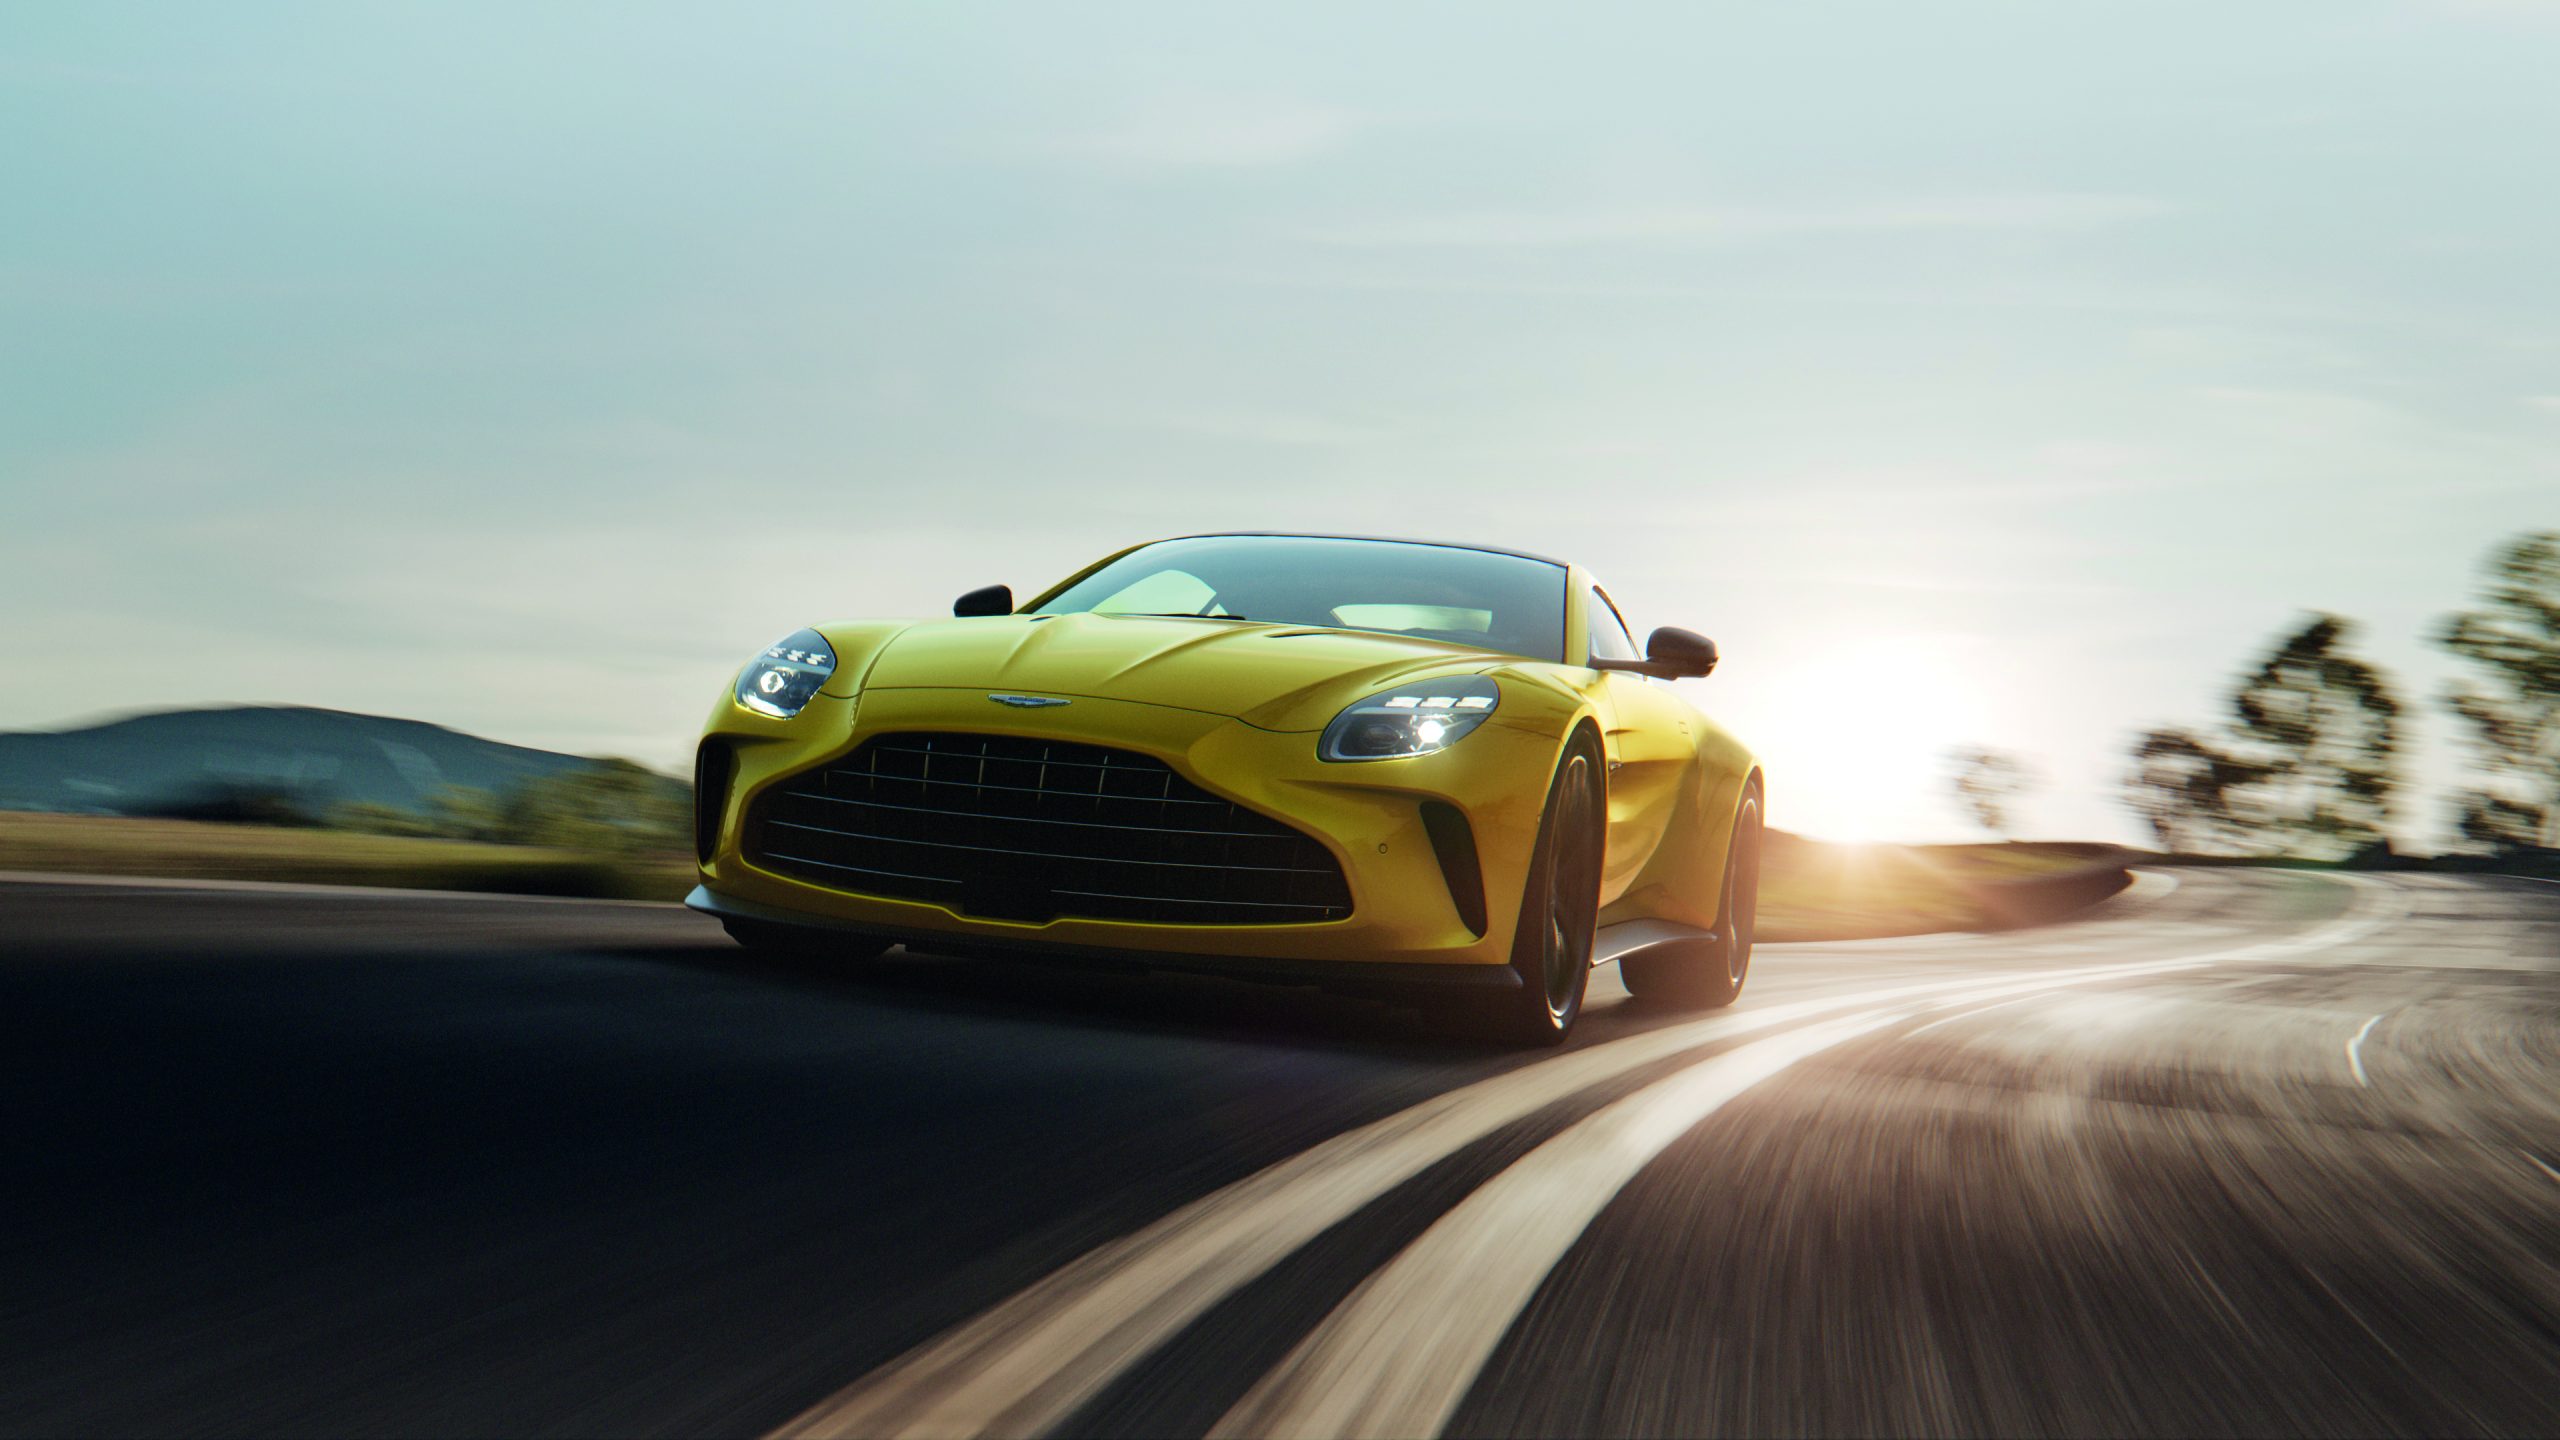 Advantage Aston: Road- and Race-Ready Vantage Is Coming. Fast.